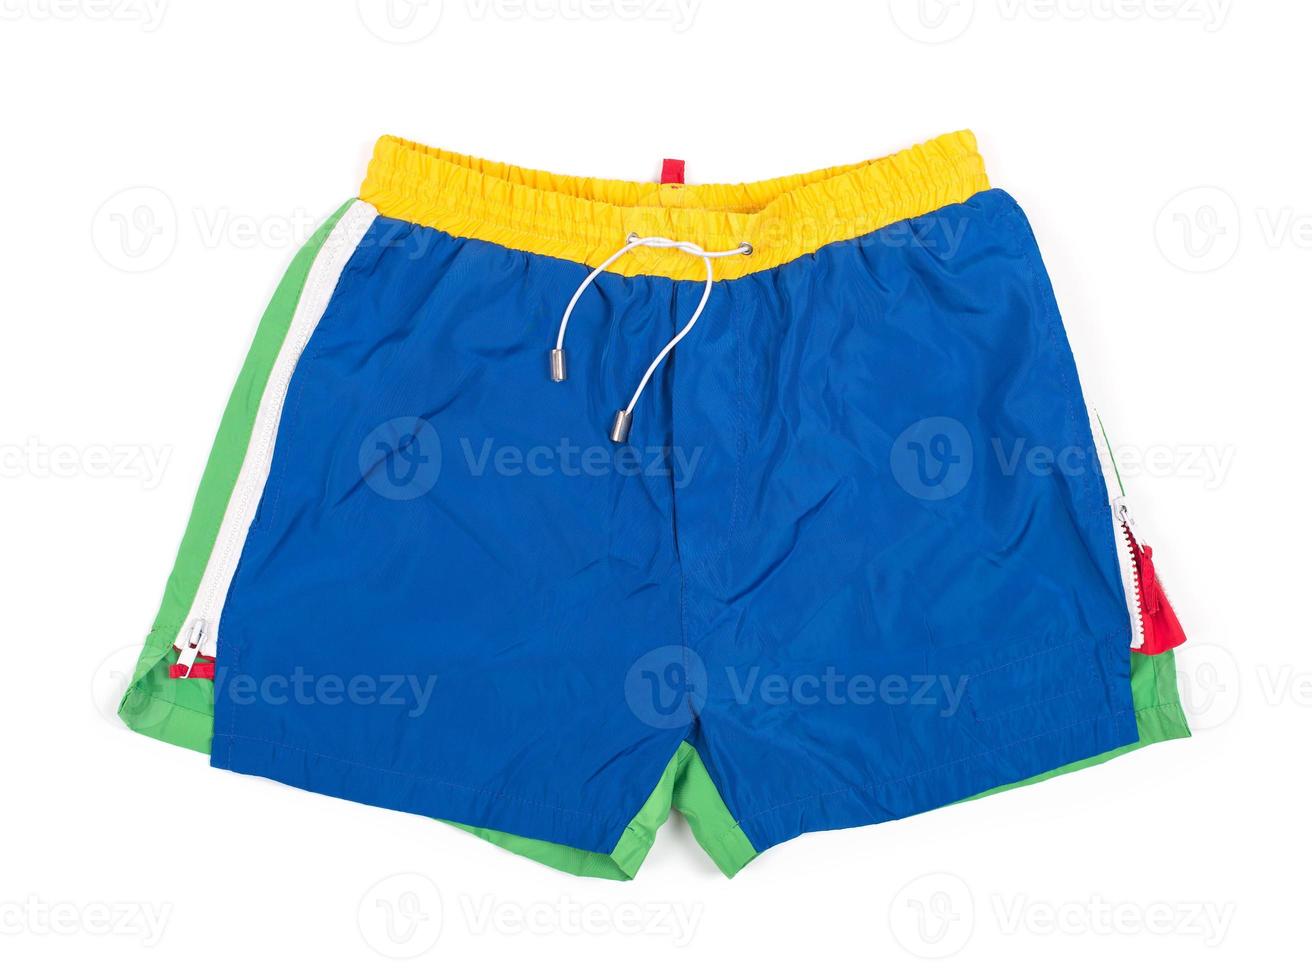 Male shorts on a white background photo